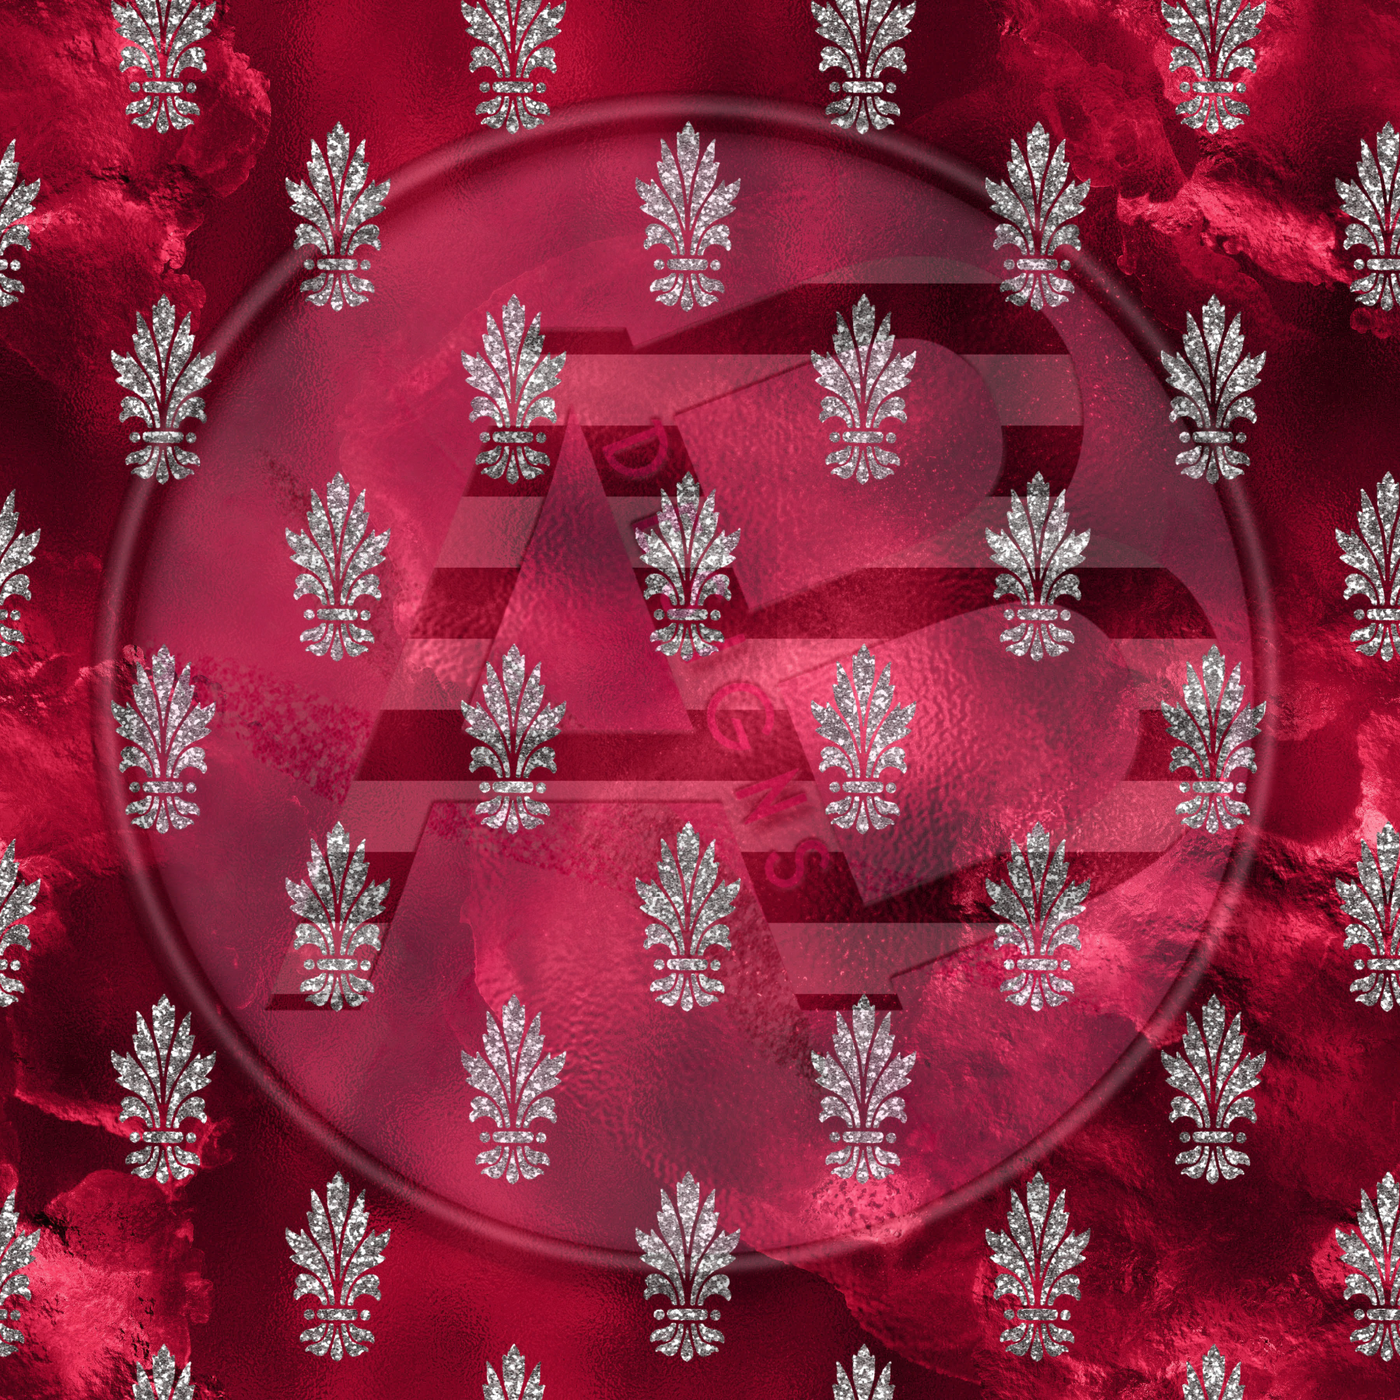 Adhesive Patterned Vinyl - Red & Silver Roses 04